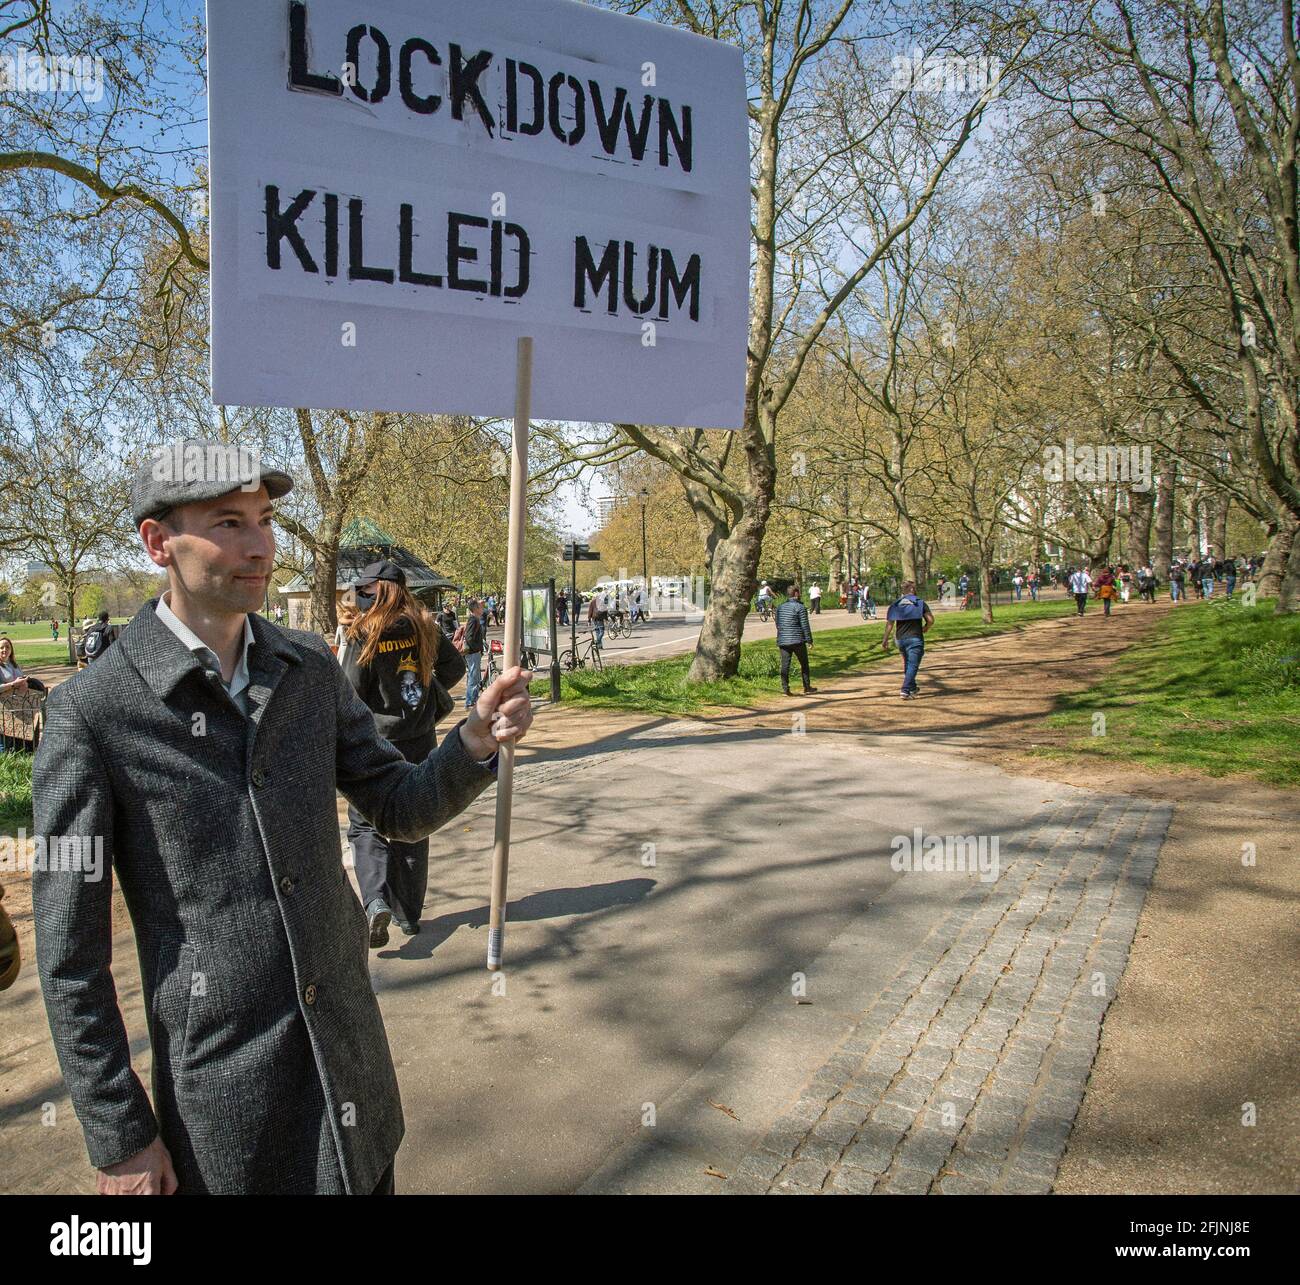 April 24, 2021,London, England, United Kingdom:   Man holds a sign “Lockdown killed Mum “during an anti-lockdown 'Unite for Freedom' protest in London Stock Photo